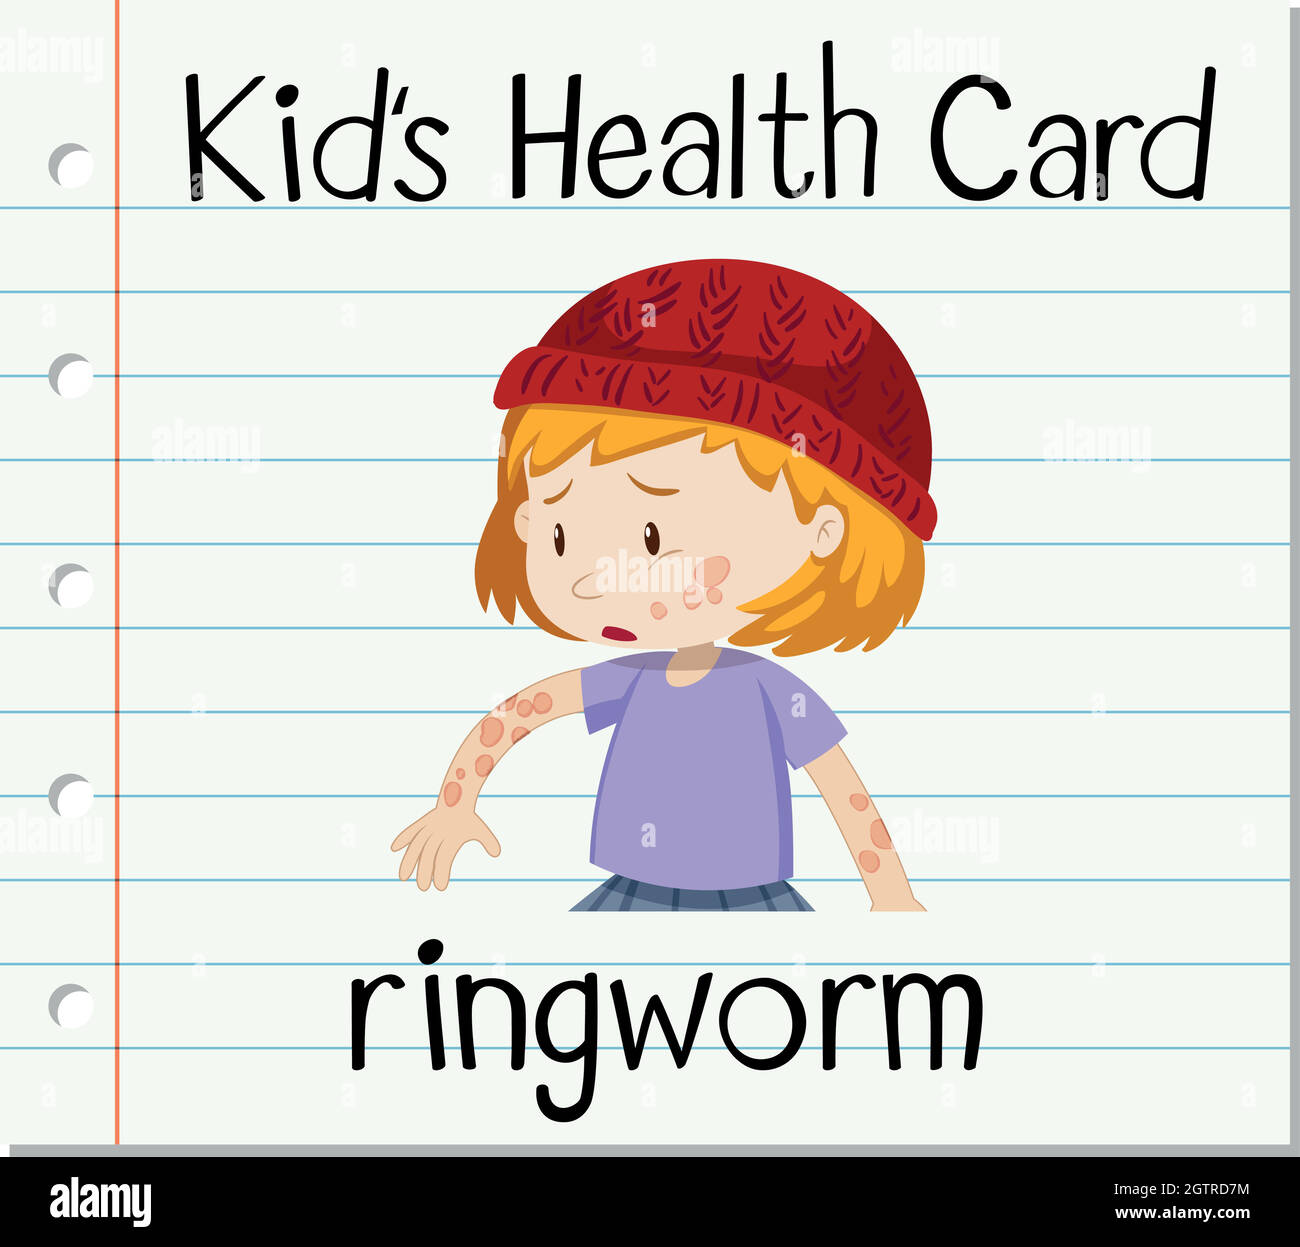 Health card with ringworm Stock Vector